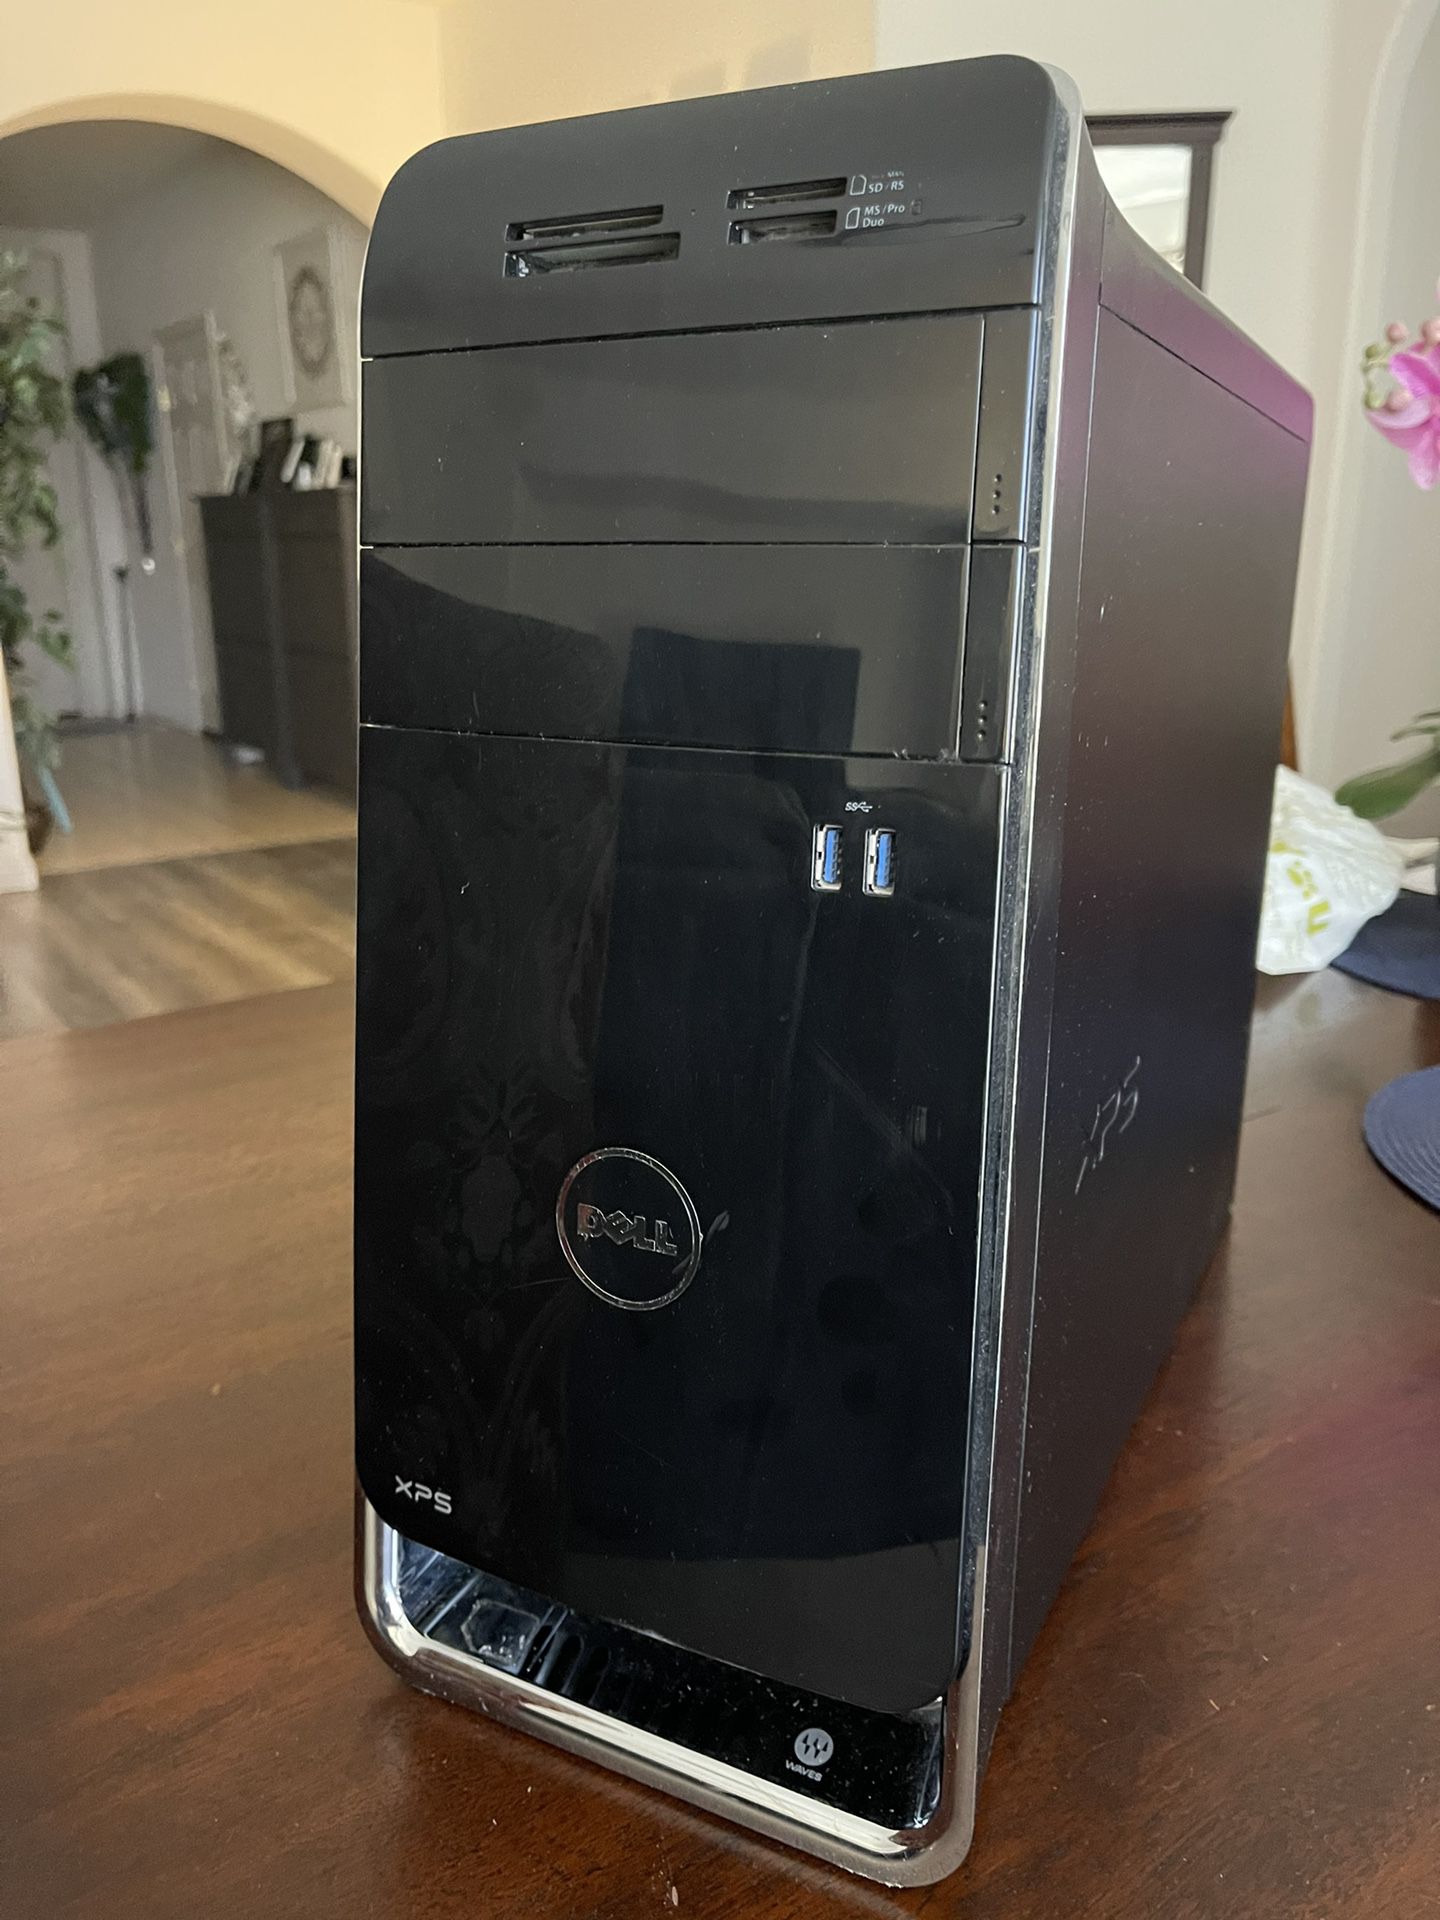 Dell XPS 8500 Gaming Desktop, I7, 12 Gigs Ram, 512 SSD, 745 GT for